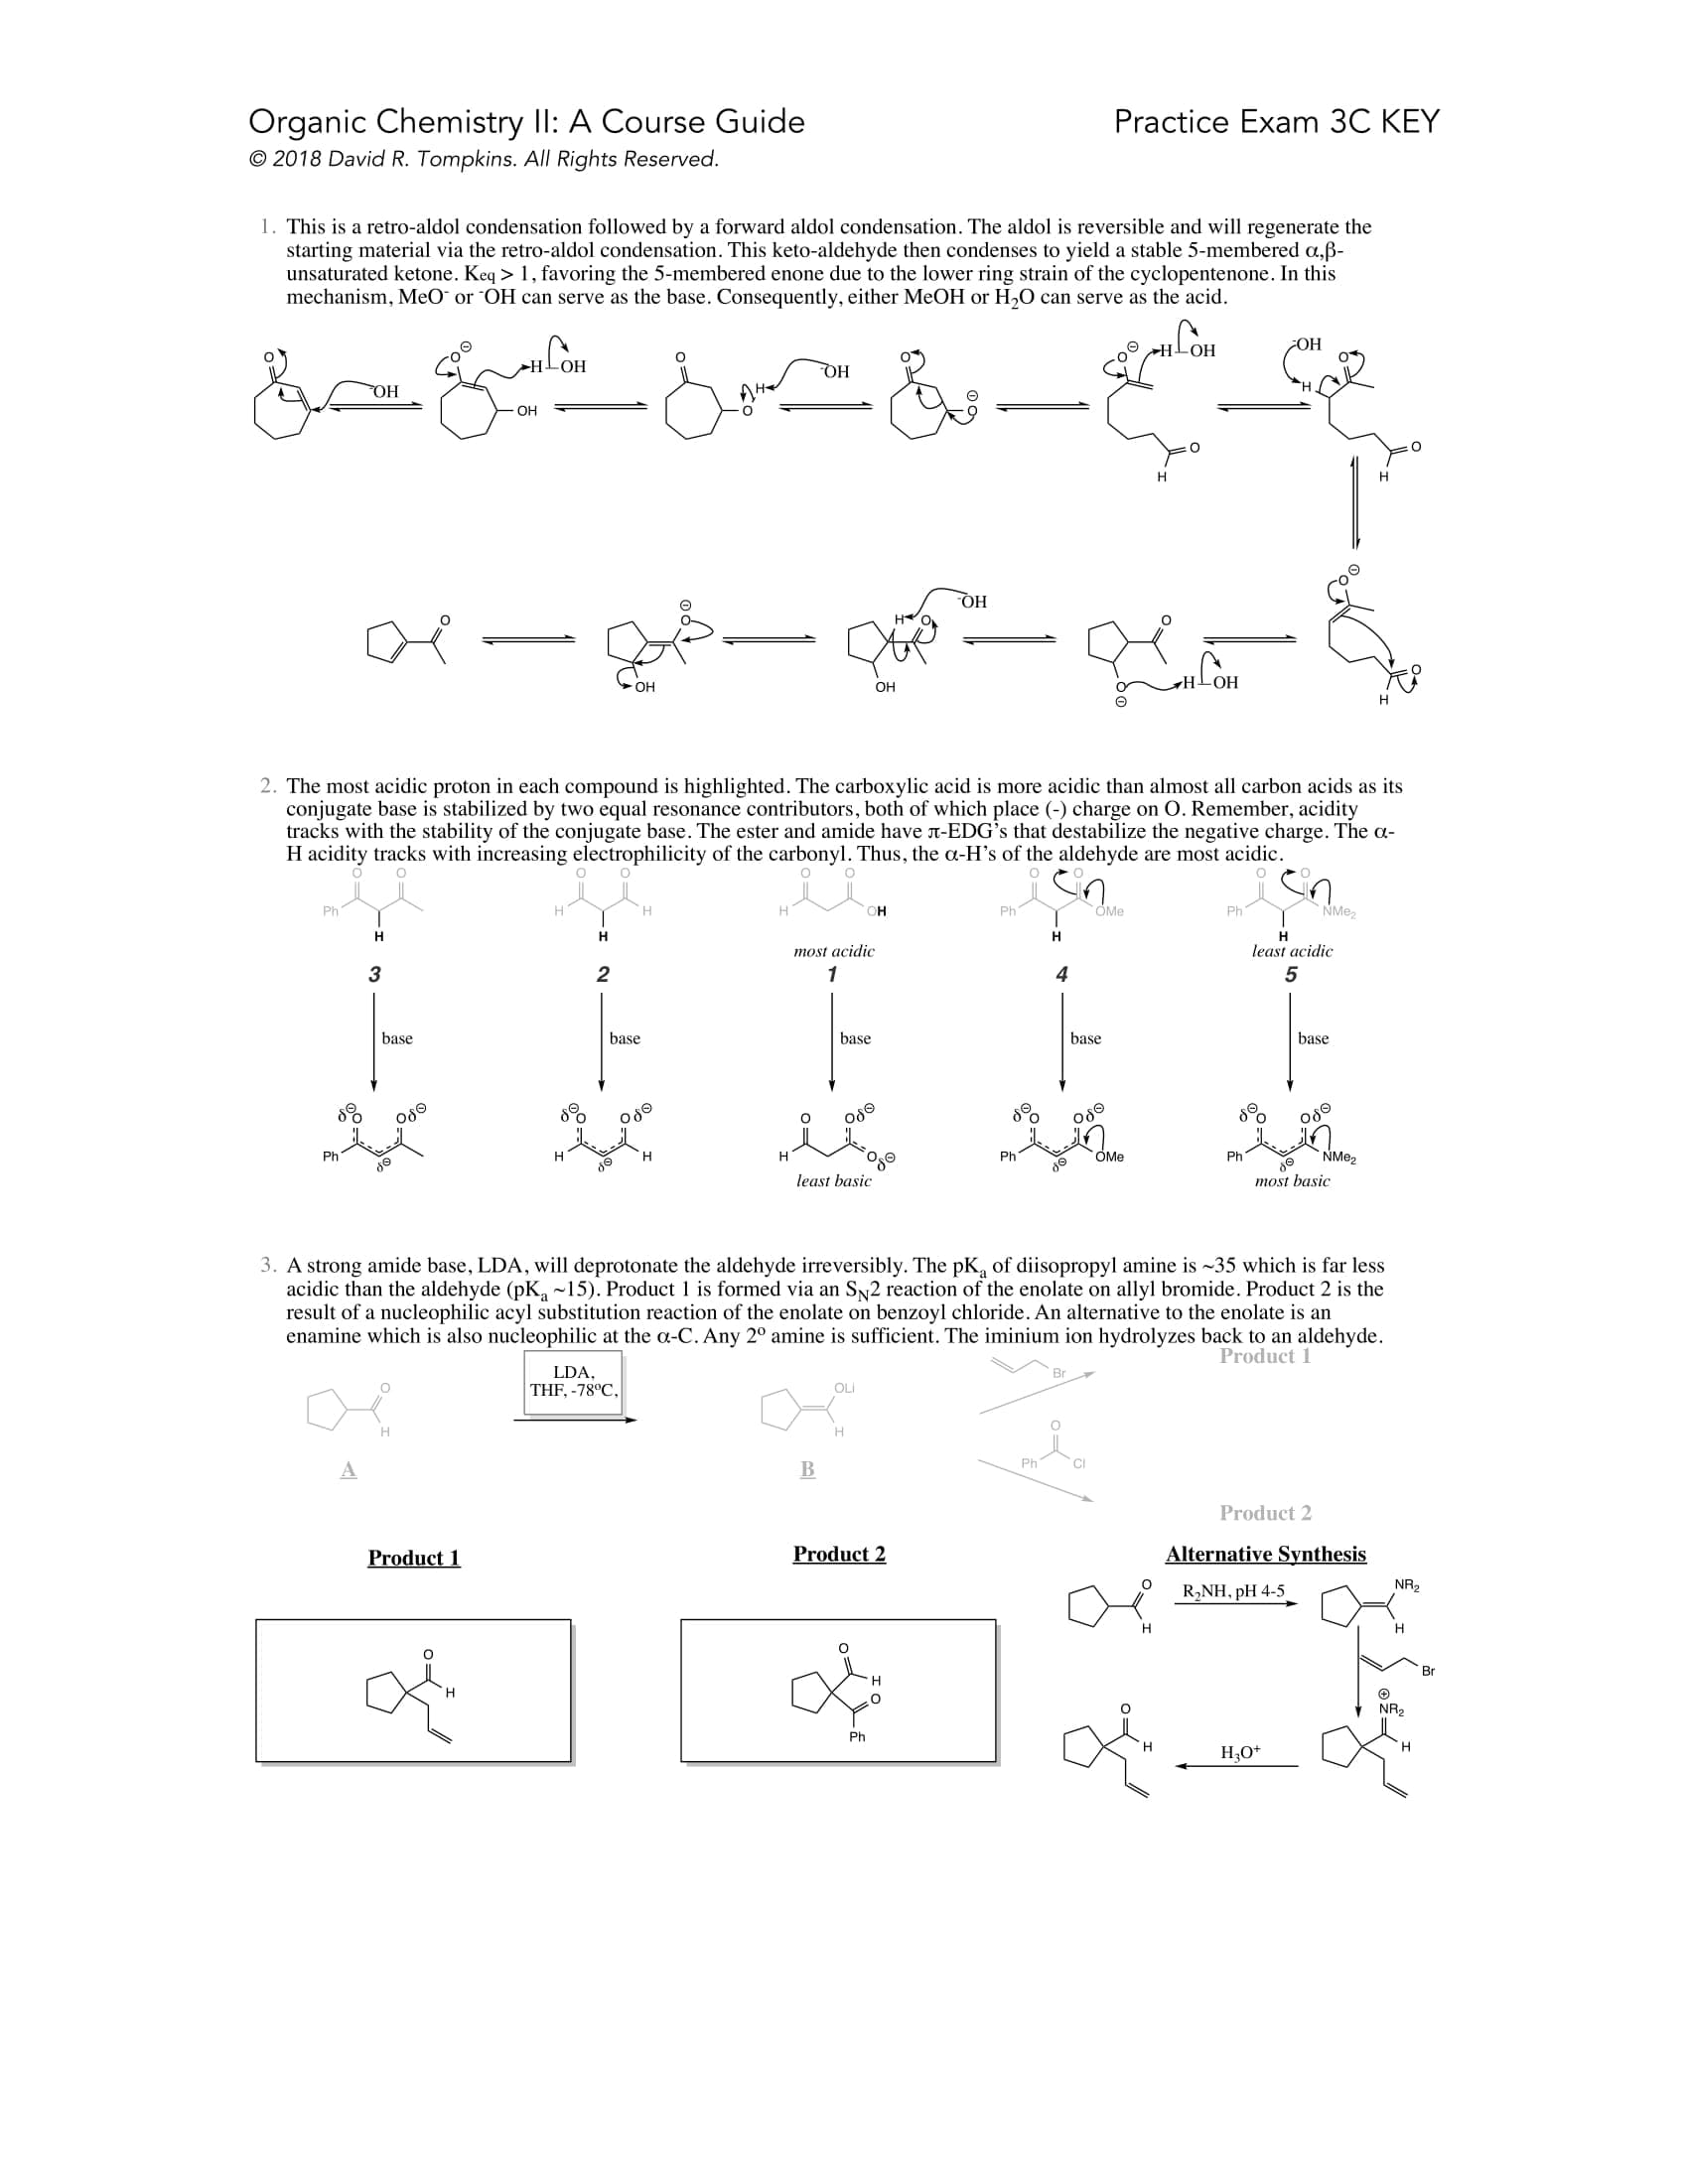 Introduction to Organic II Chemistry (Duke) Course Guide Example Page 4